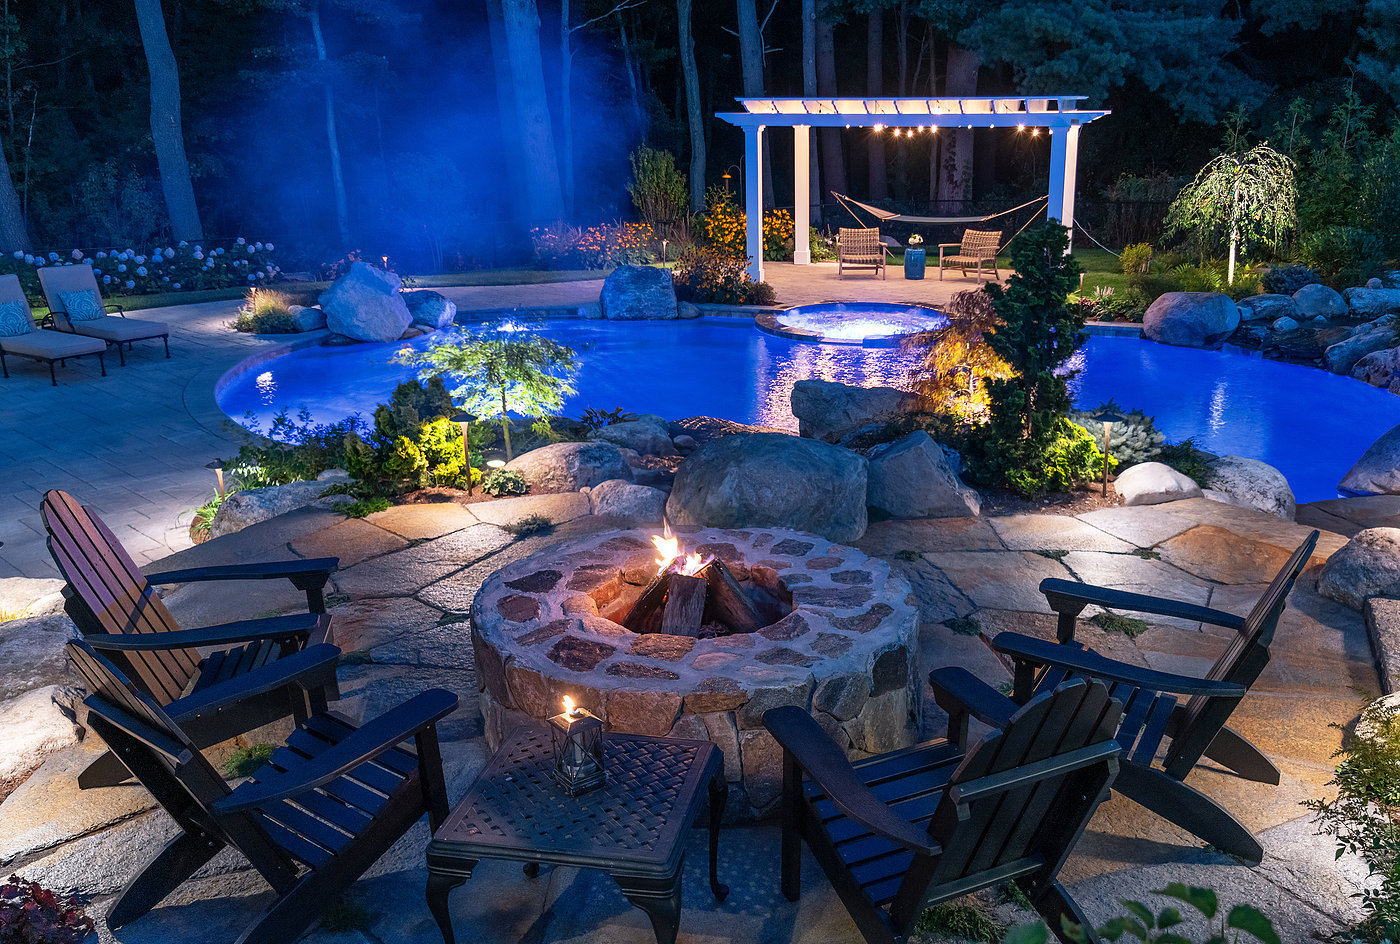 Fire Pit and Pool at Night